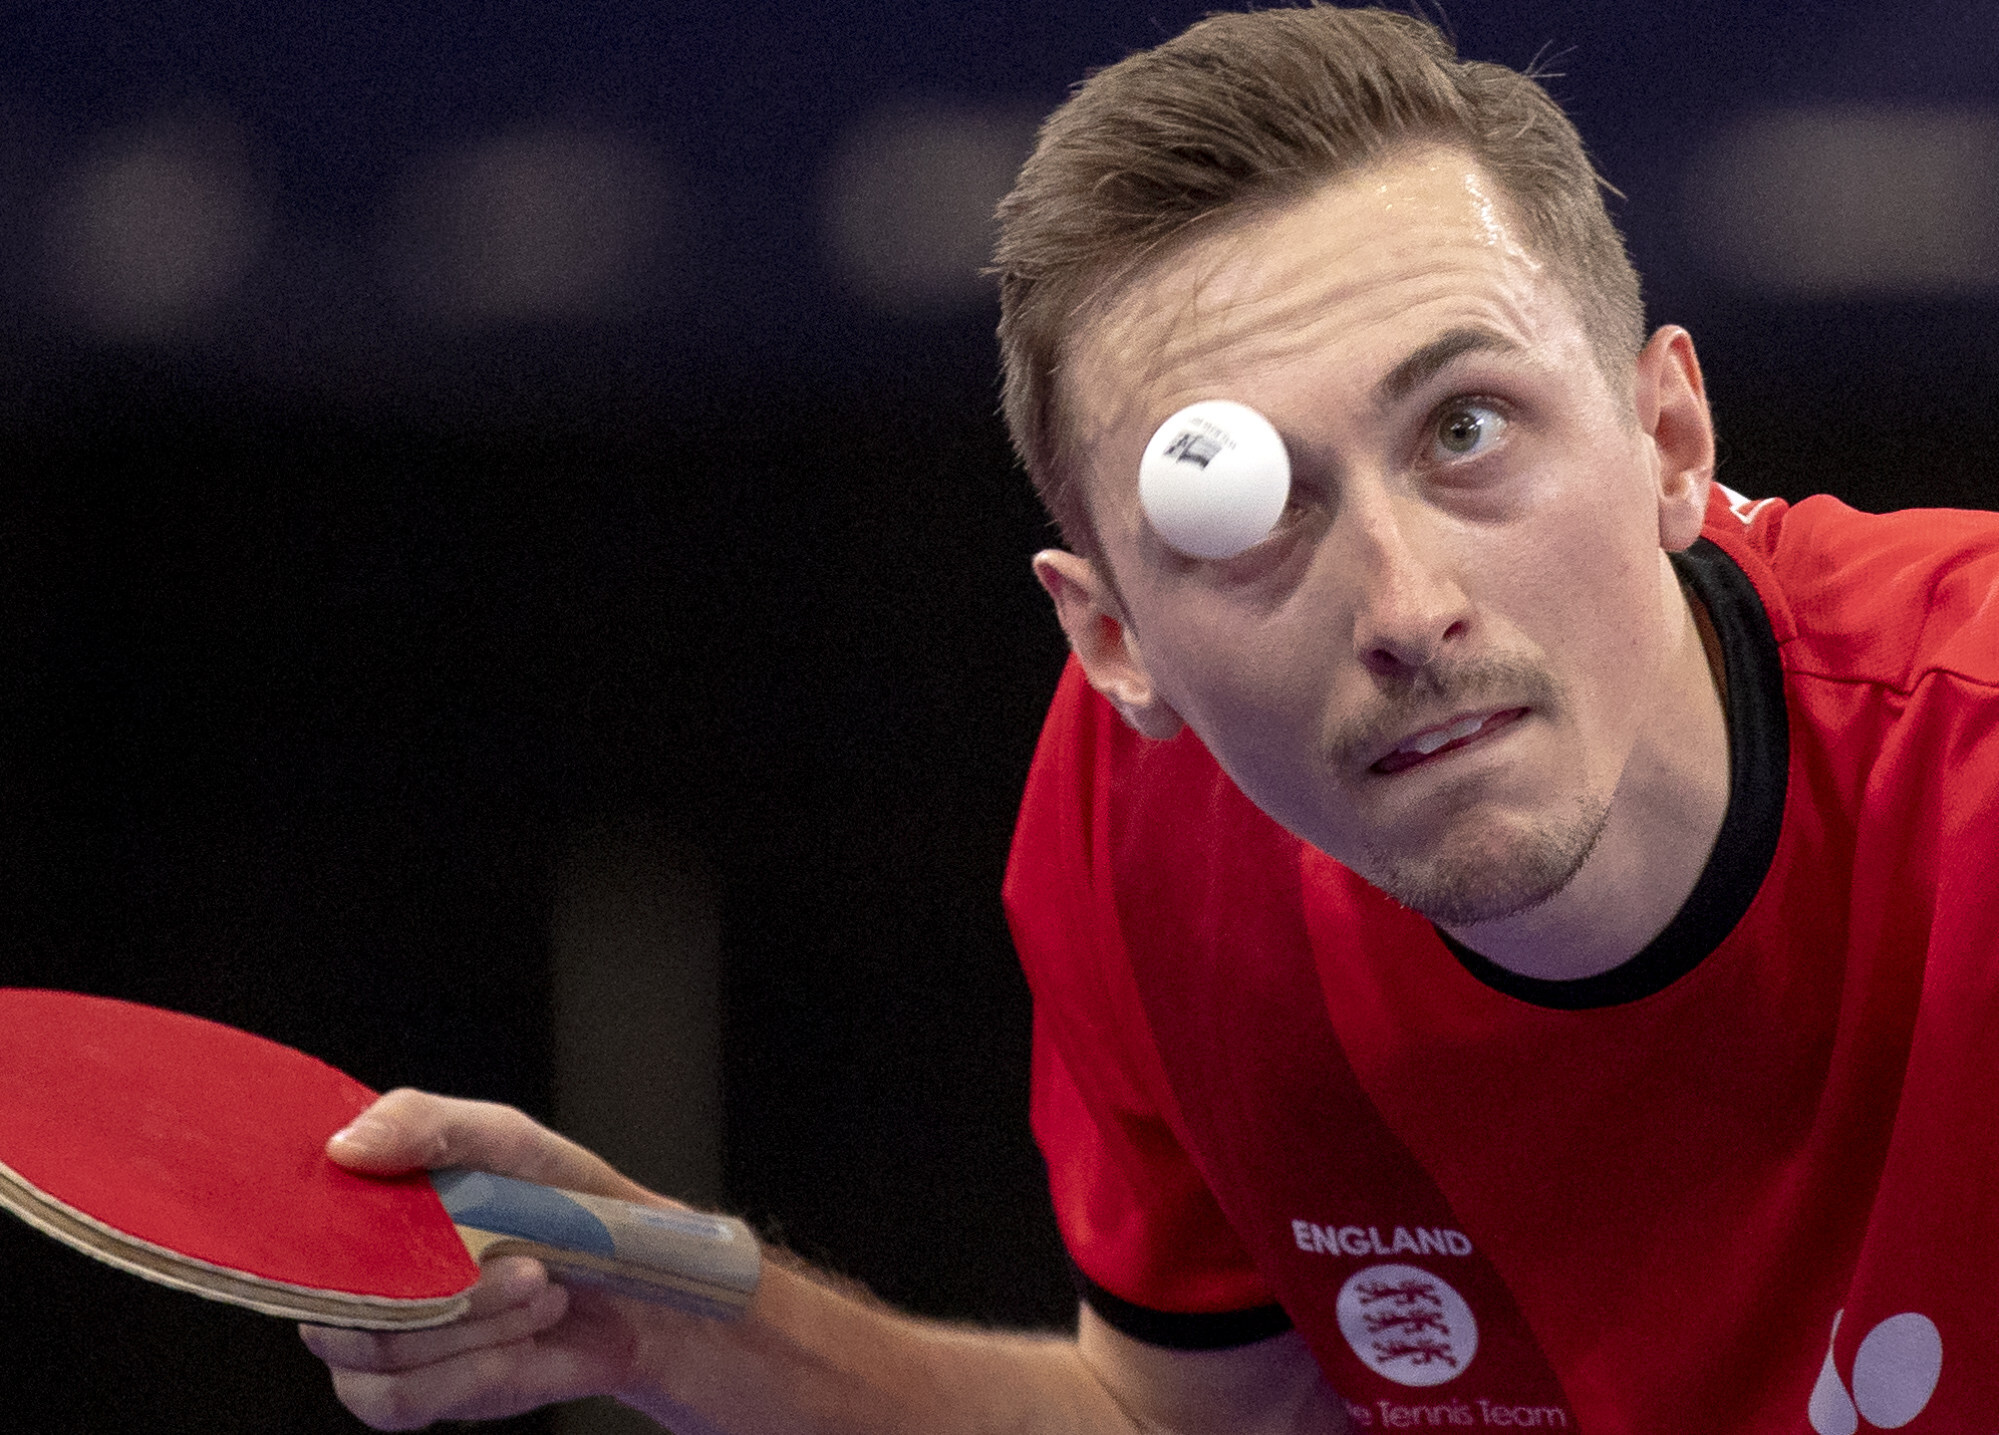 Table tennis player strikes bowling pins with ping-pong balls